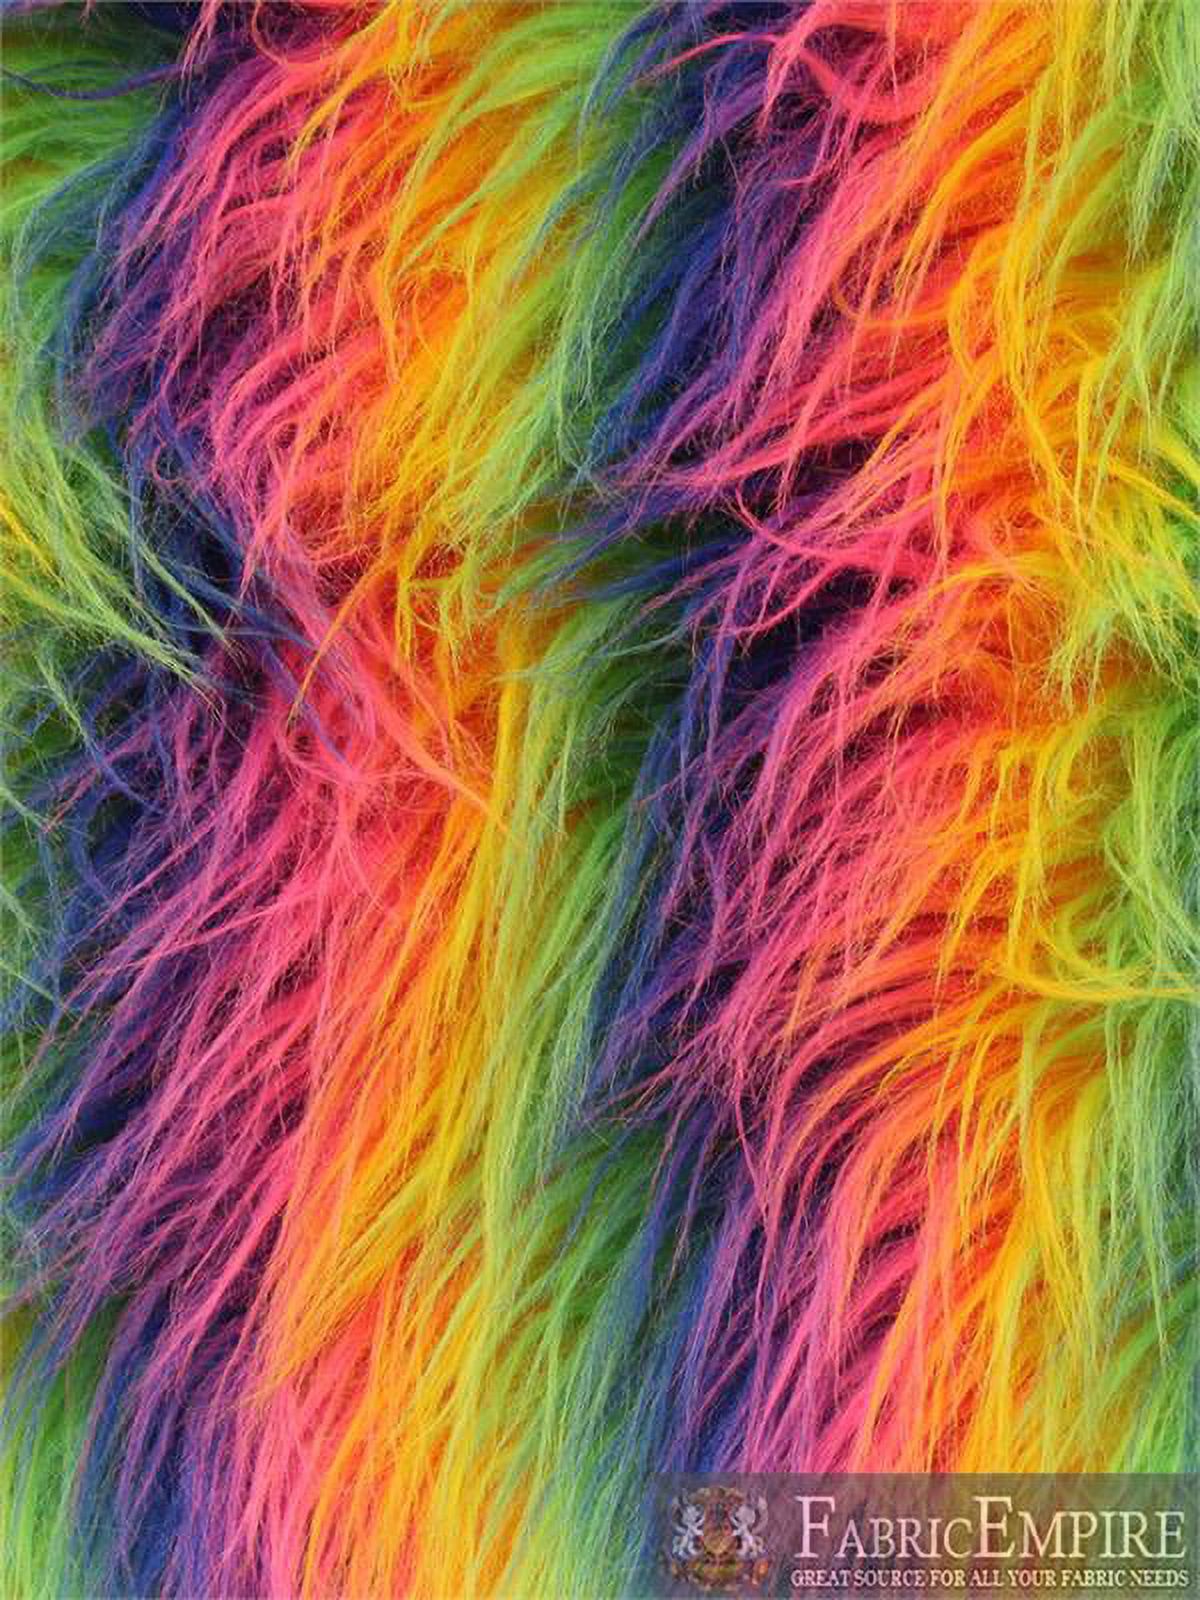 Faux Fur Fabric Long Pile GORILLA Rainbow Stripes / 60" Wide / Sold by the yard - image 1 of 5